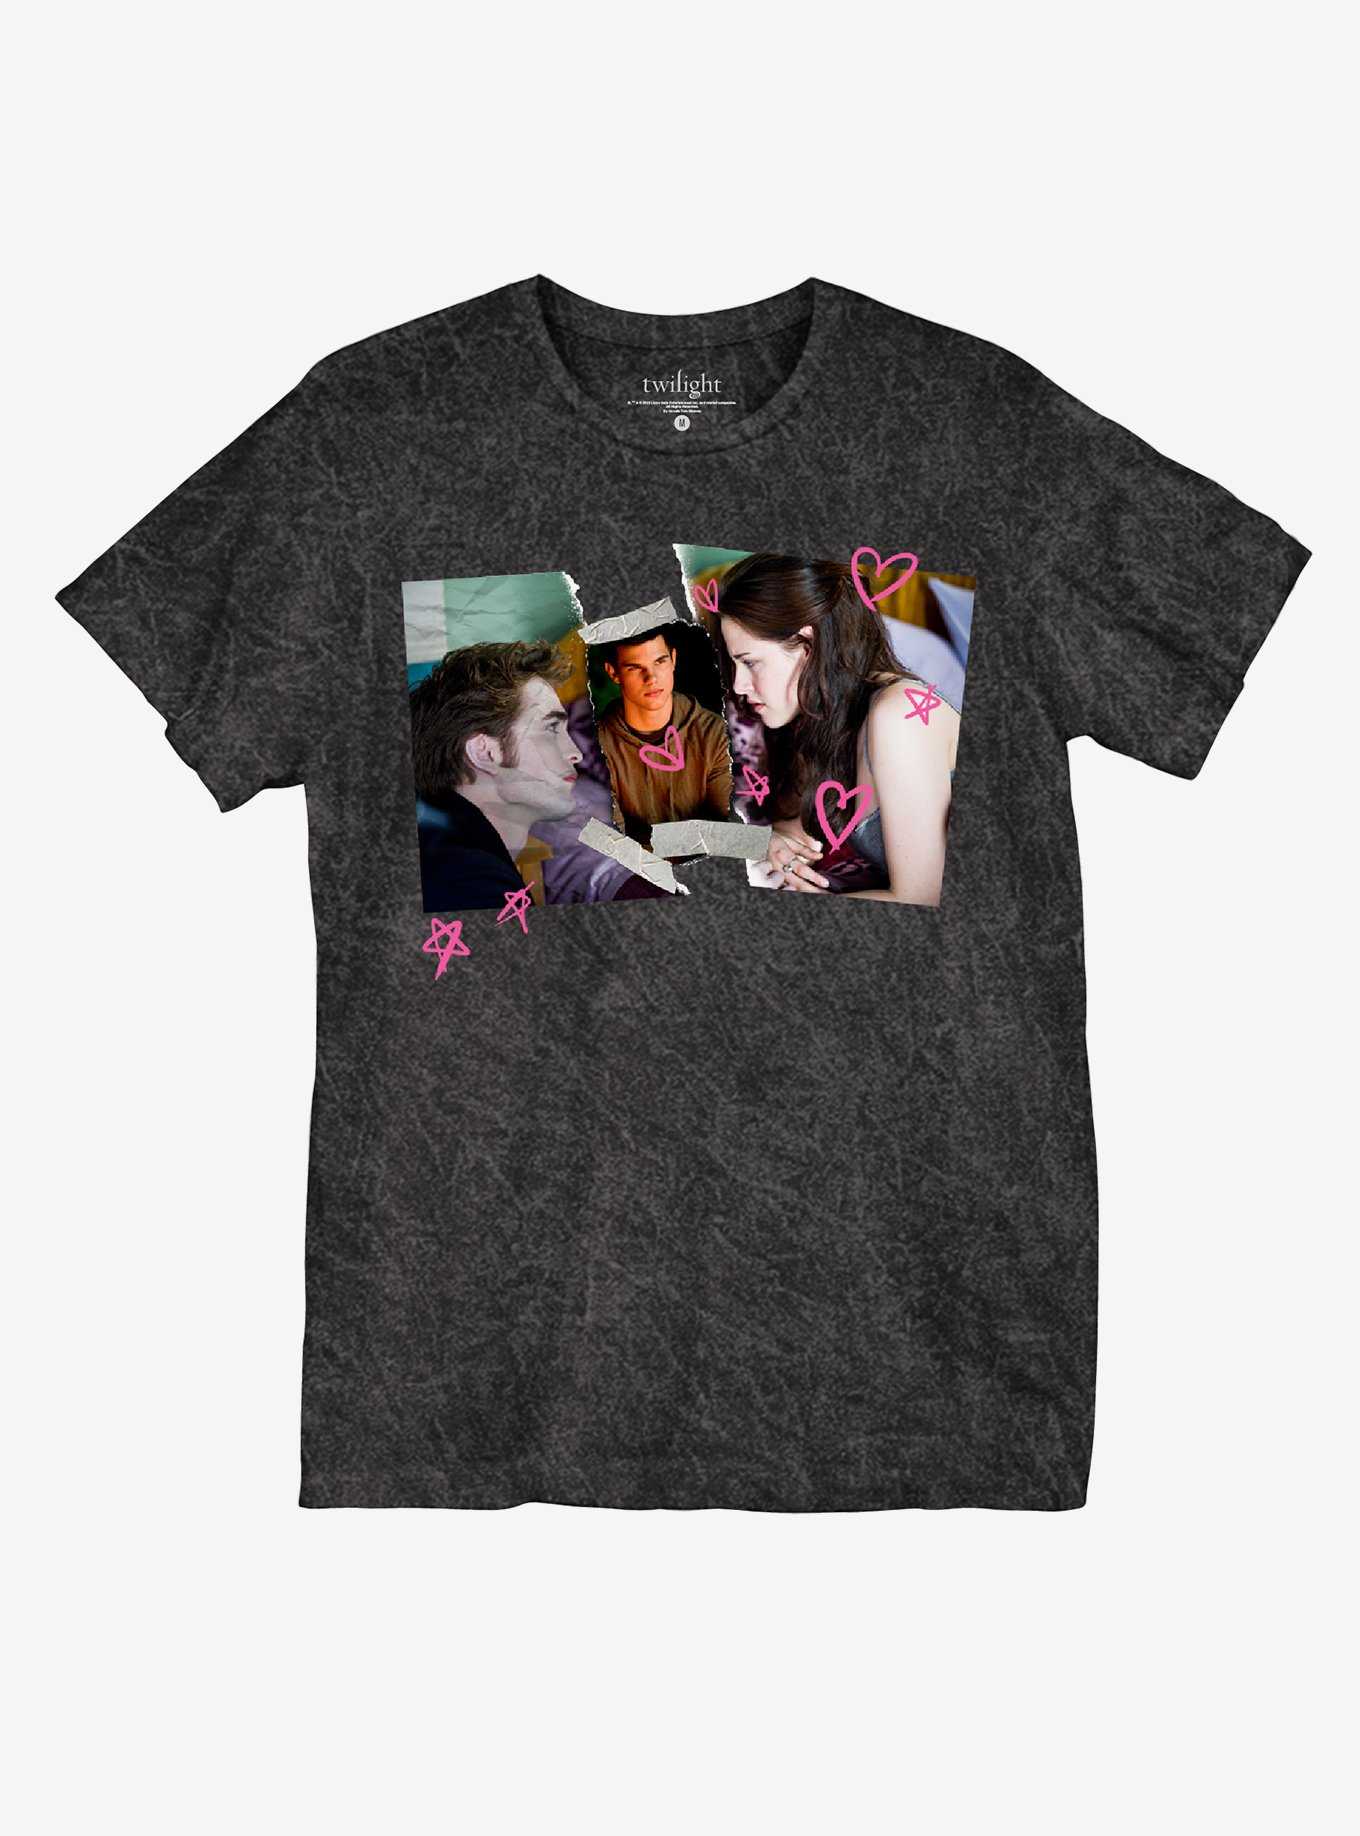 Twilight Love Triangle Story T-Shirt, Men's Graphic Movie Tees